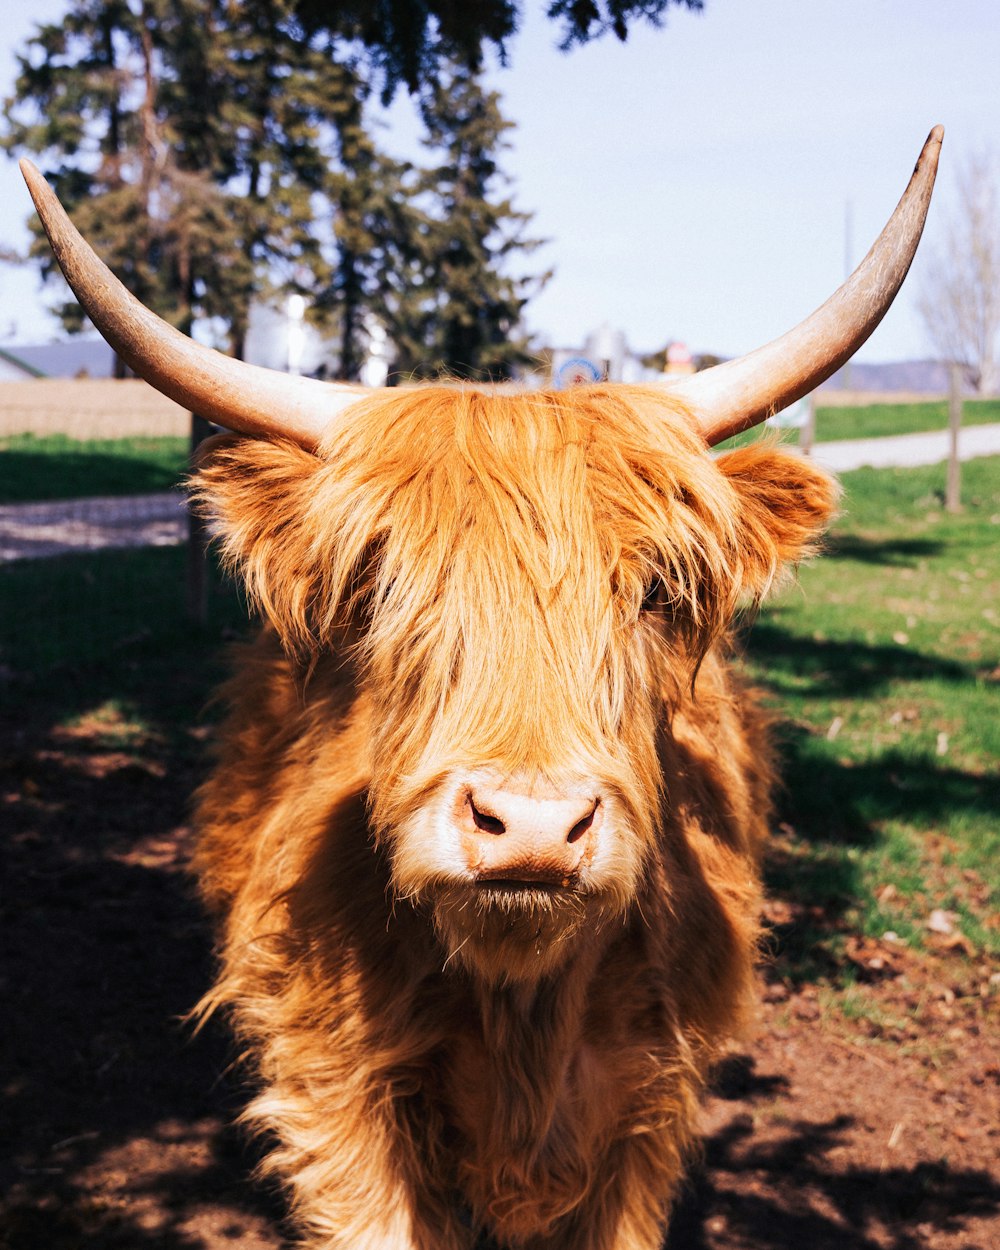 a brown cow with large horns standing in a field